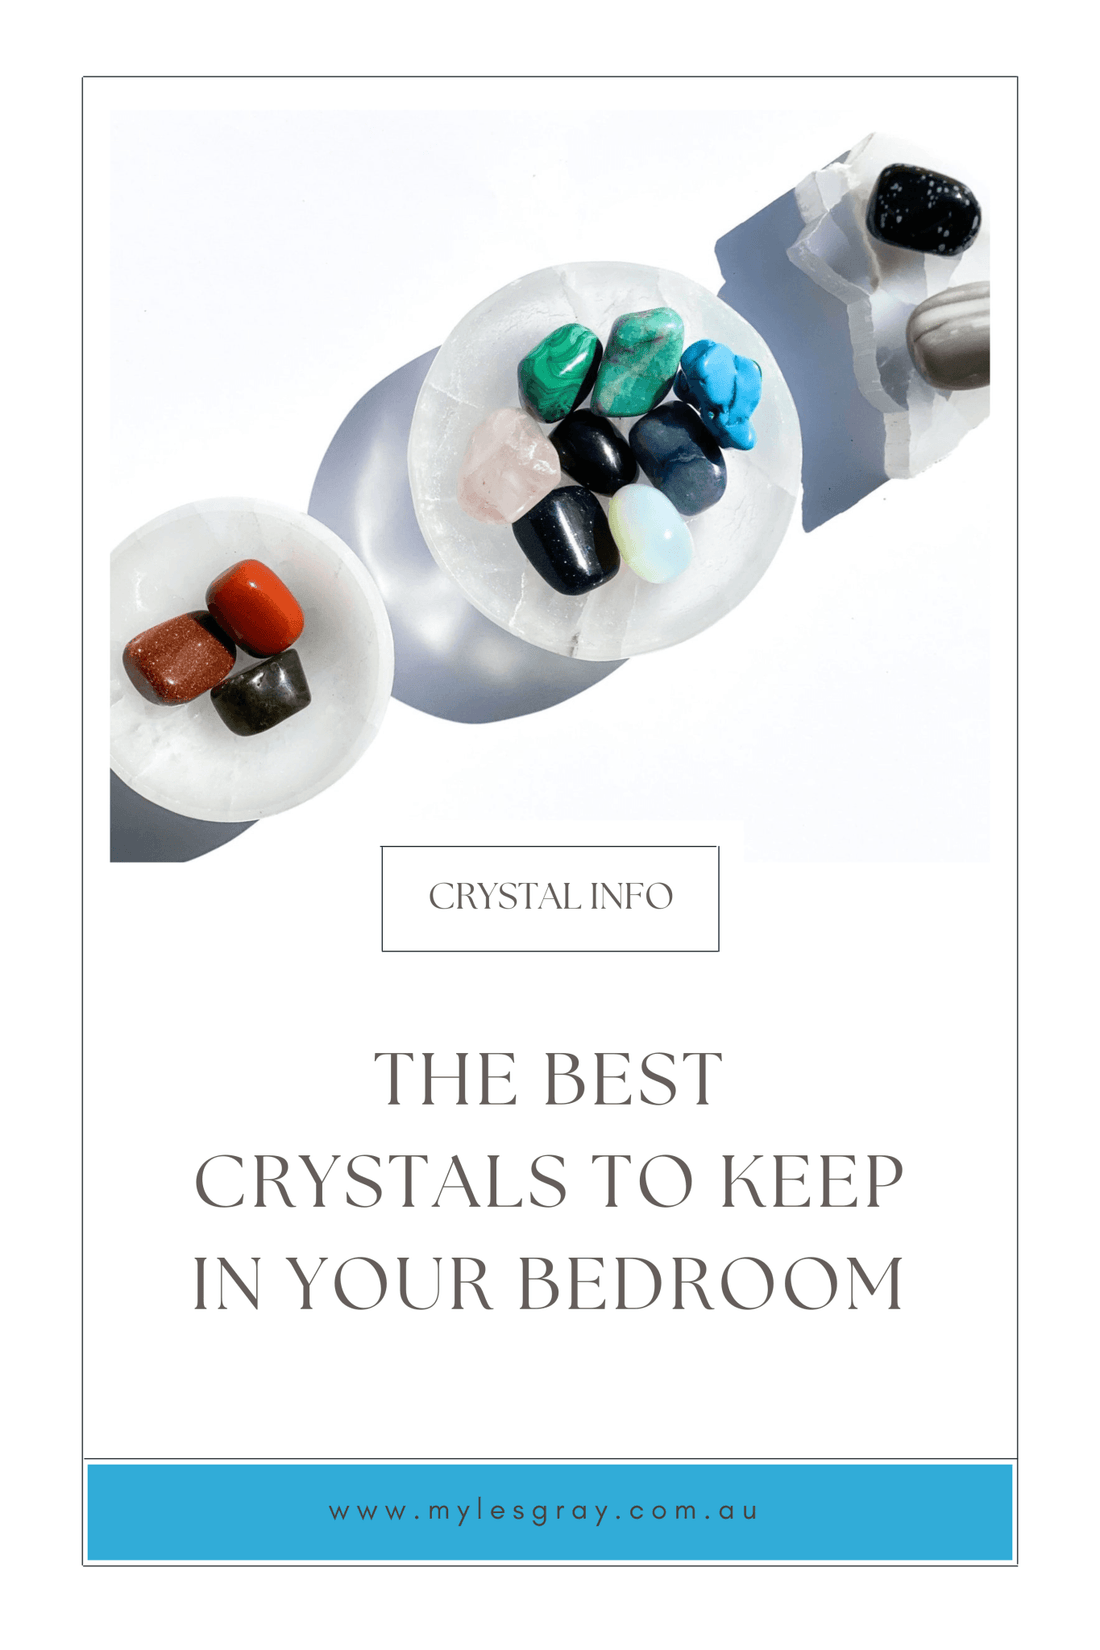 The Best Crystals To Keep In Your Bedroom - Myles Gray